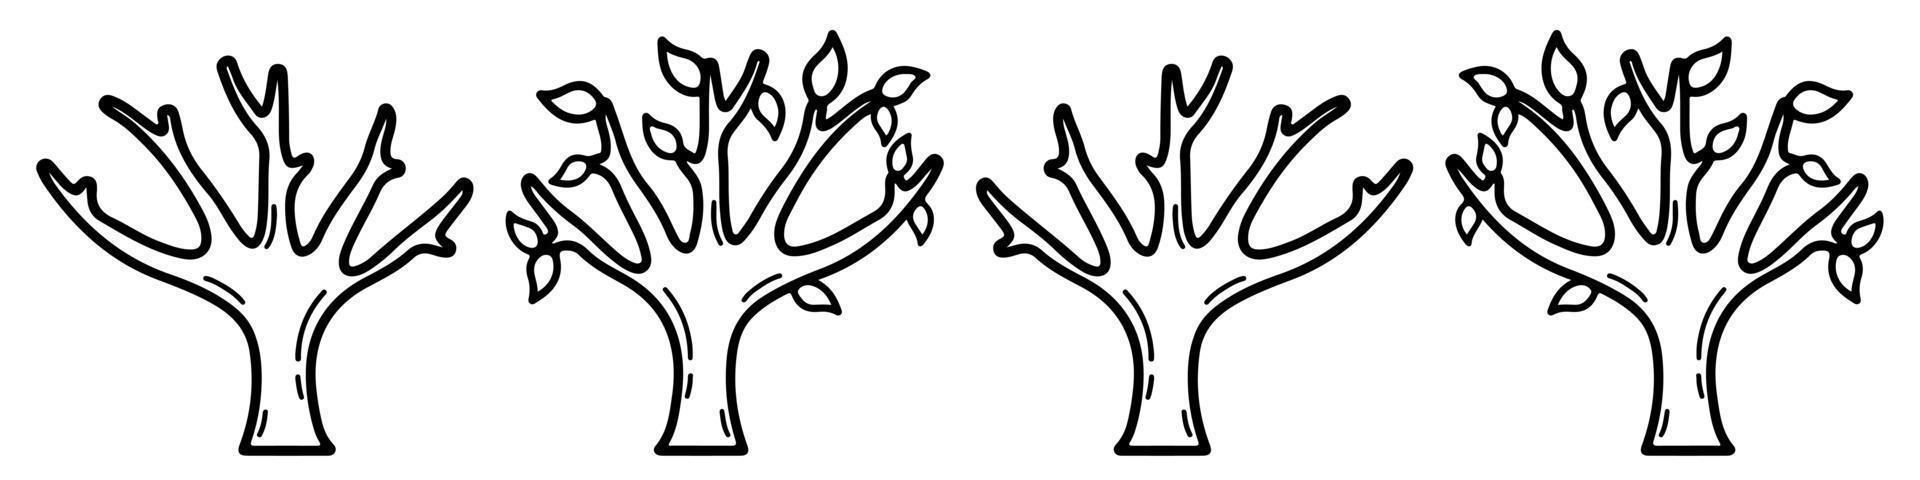 Bare tree Silhouette art vector design plant bare shape for websites, printing and others.